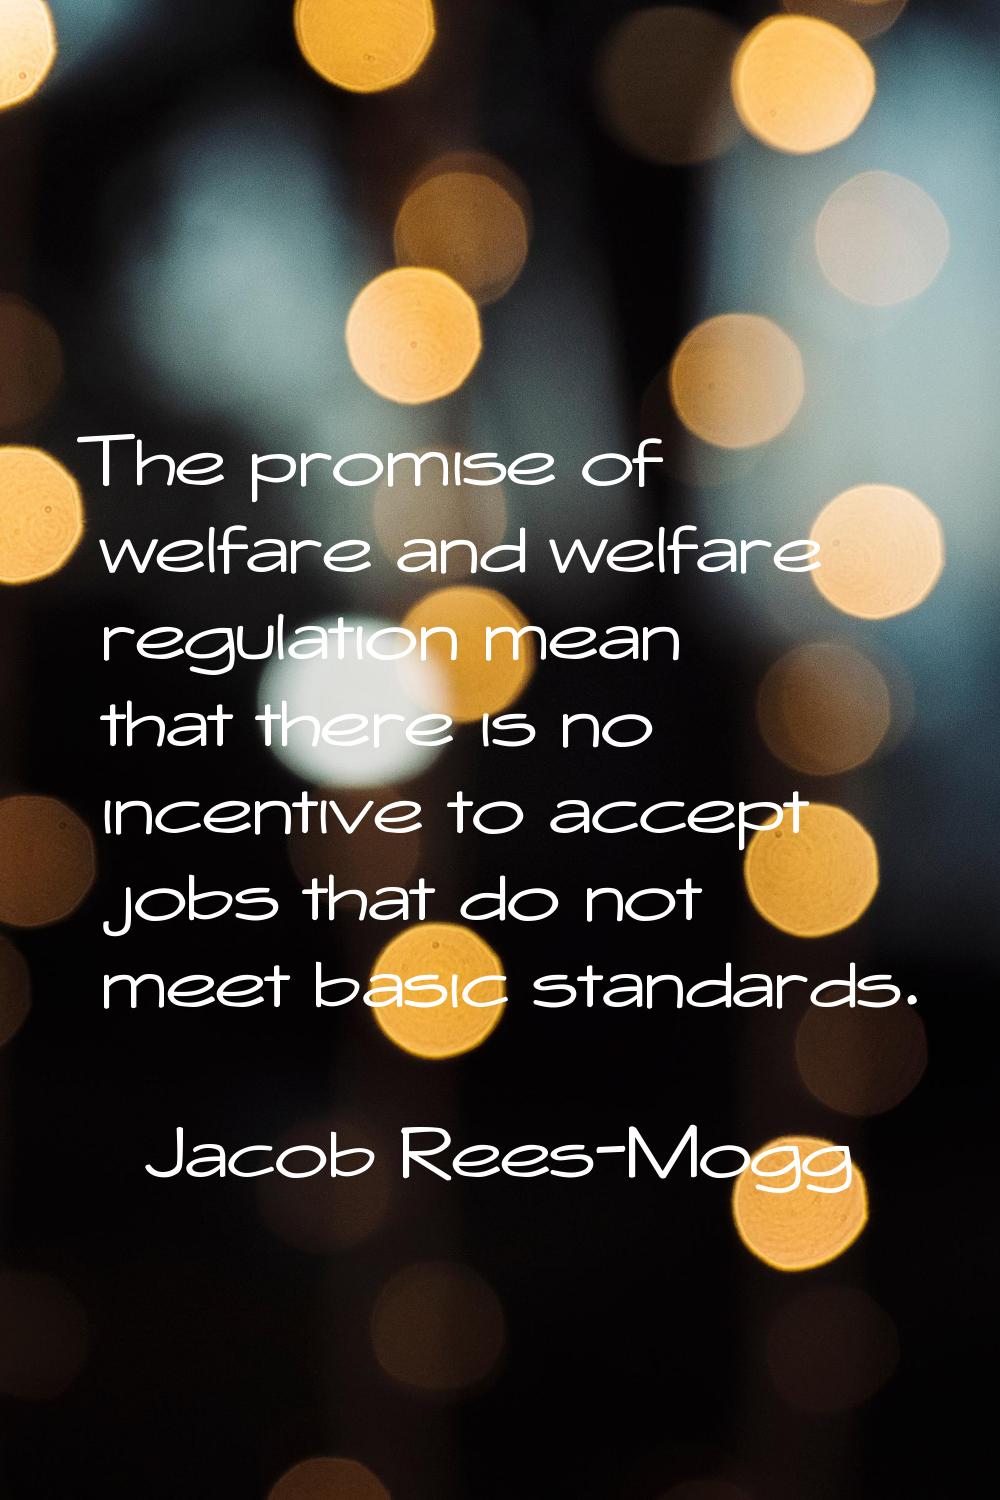 The promise of welfare and welfare regulation mean that there is no incentive to accept jobs that d